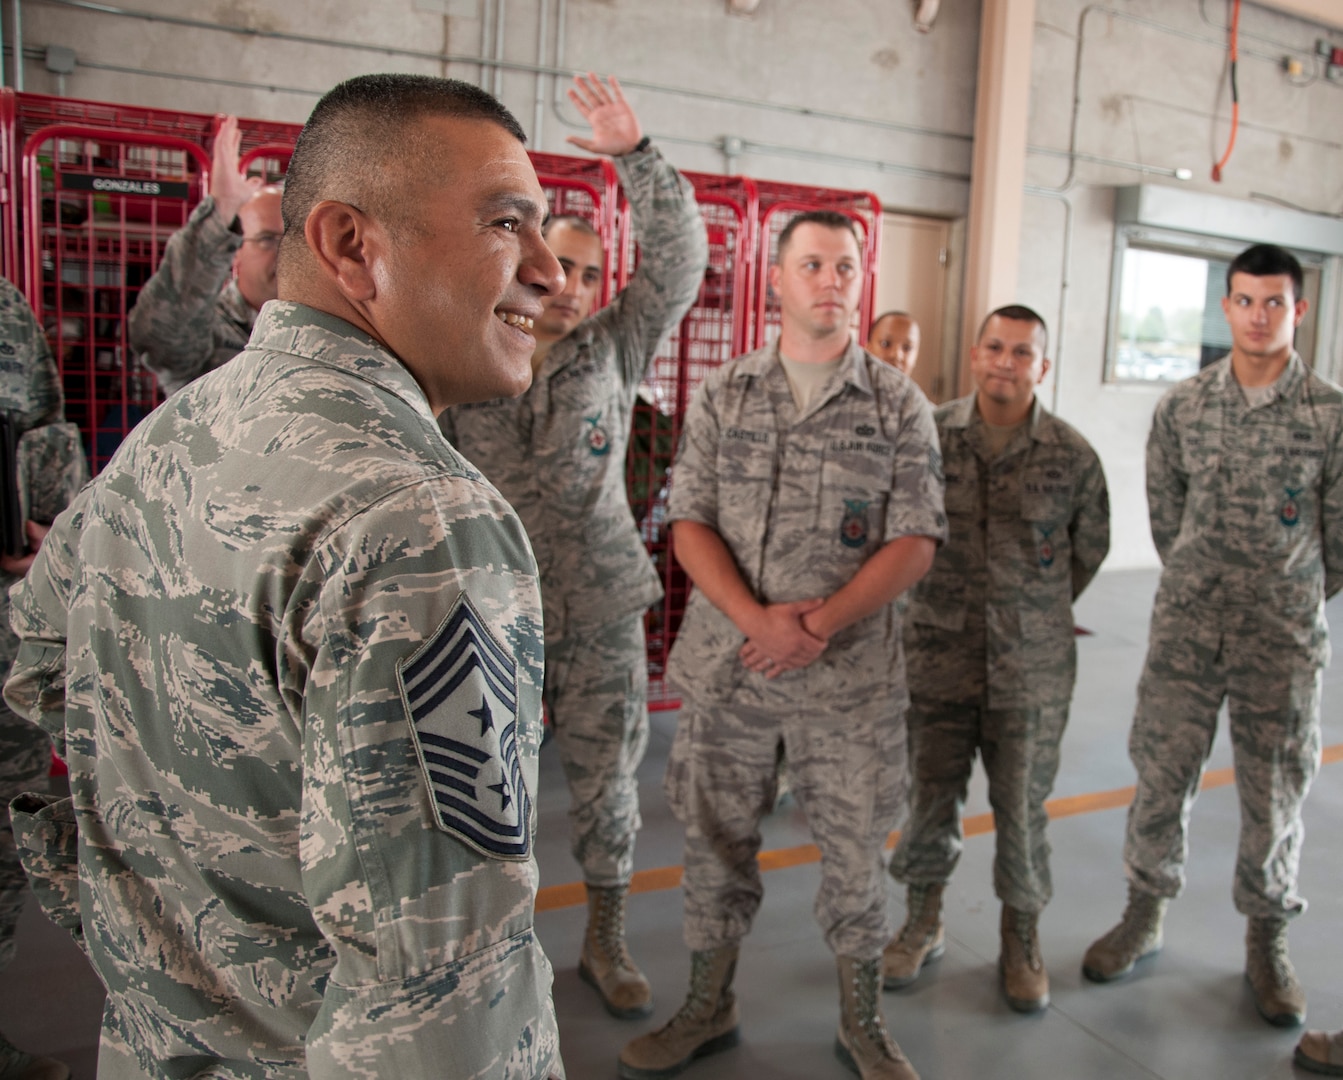 Chief Master Sgt. Gerardo Tapia, Air Education and Training Command command chief, speaks with firefighters from Laughlin’s 47th Civil Engineer Squadron at Laughlin Air Force Base, Texas, May 16, 2013. While visiting Laughlin, Tapia inspected several base facilities and met with numerous airmen from around base. (U.S. Air Force photo/Airman 1st Class John D. Partlow)